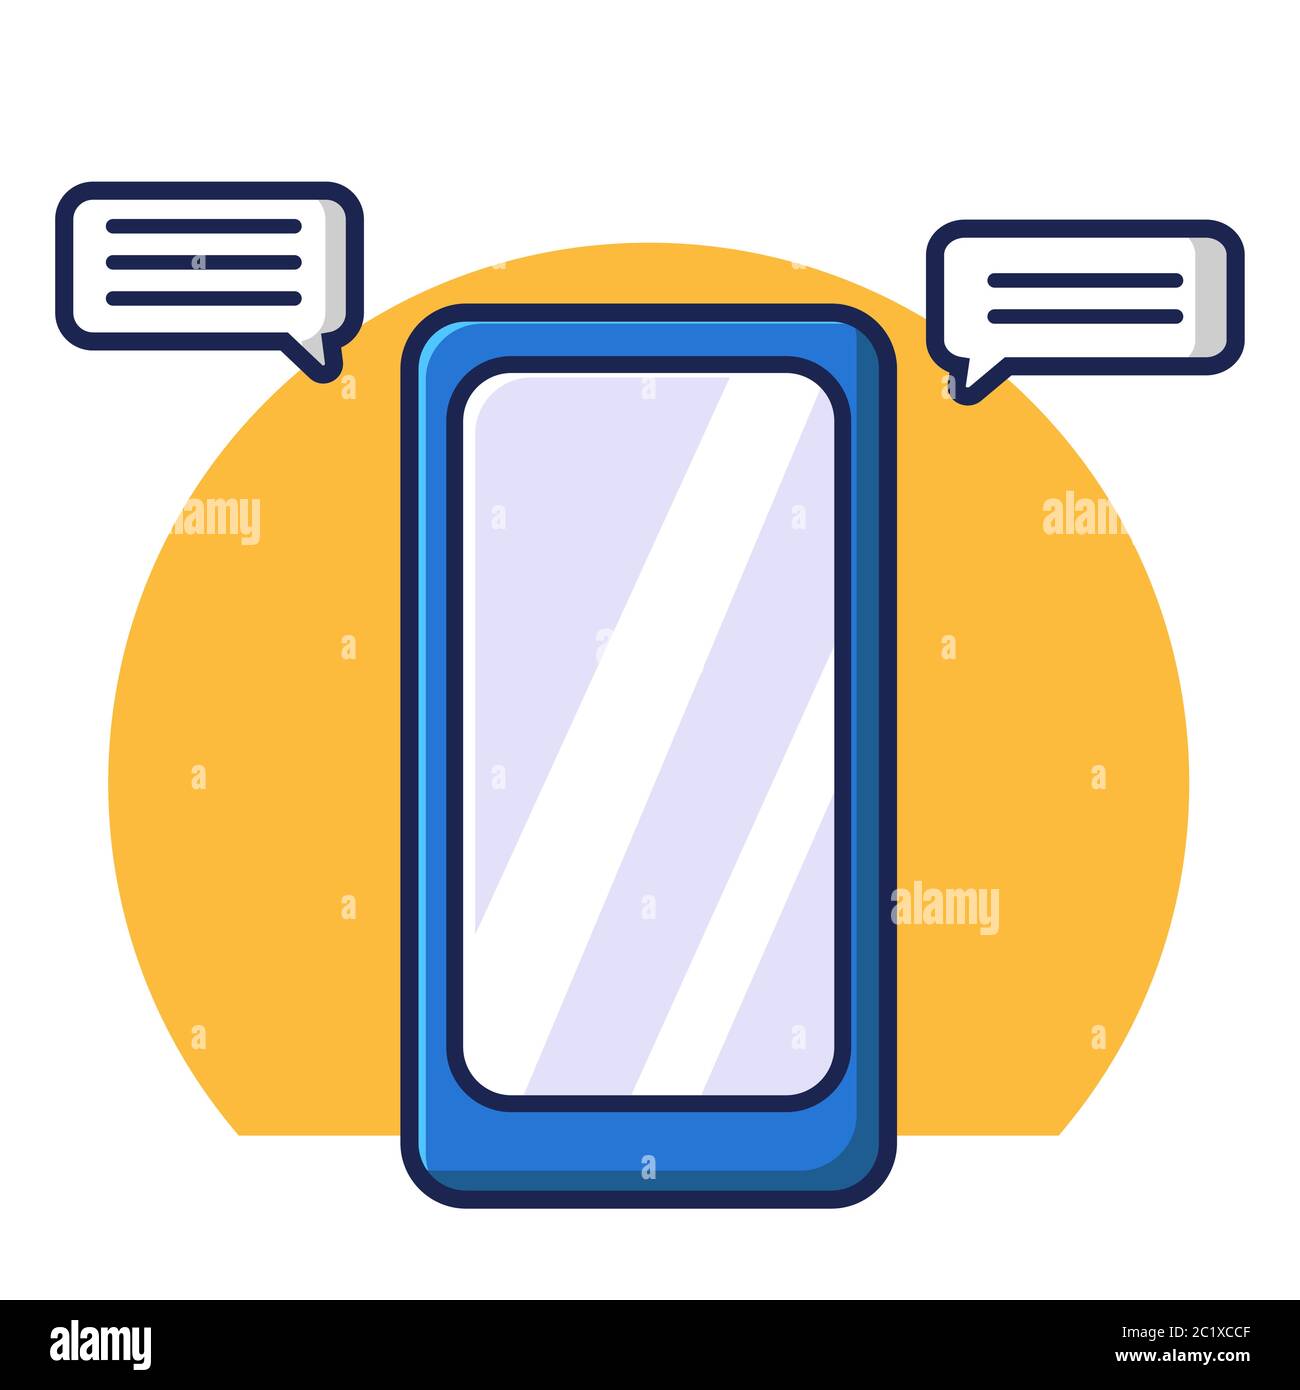 Handphone With Messages Vector Illustration Smartphone Flat Cartoon Style Stock Vector Image Art Alamy